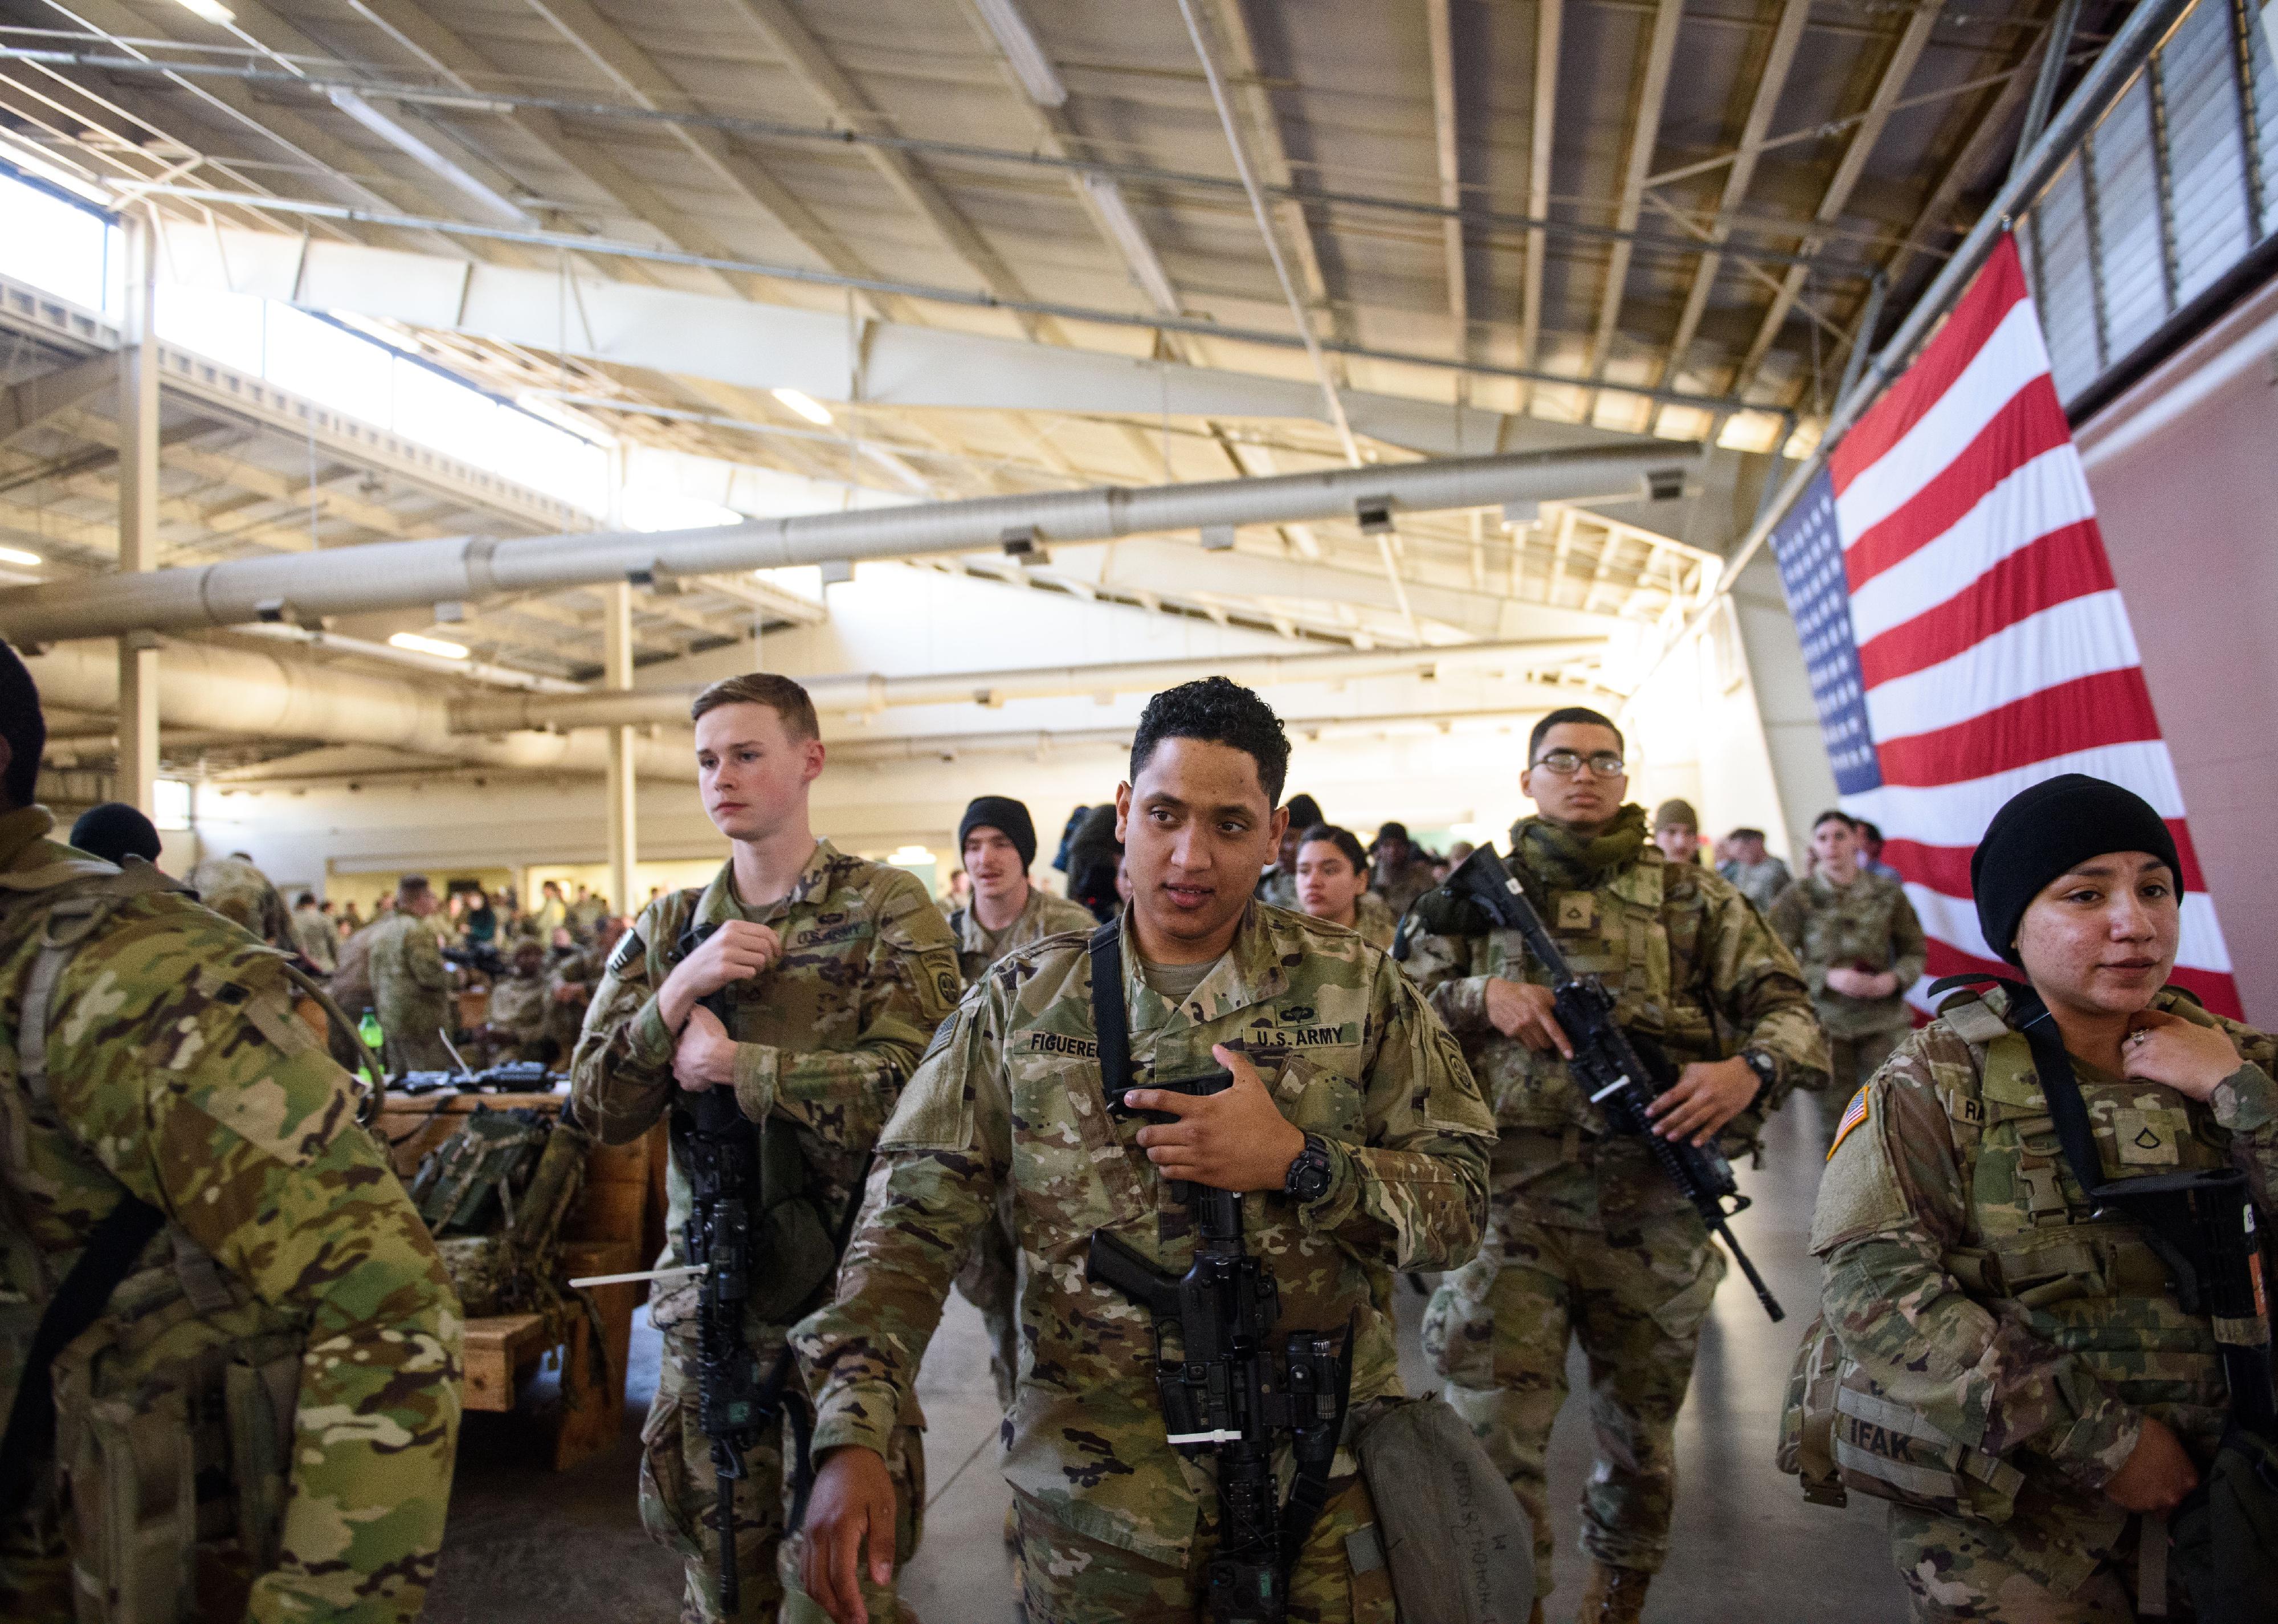 Soldiers in a warehouse listening to instruction next to a large American flag.